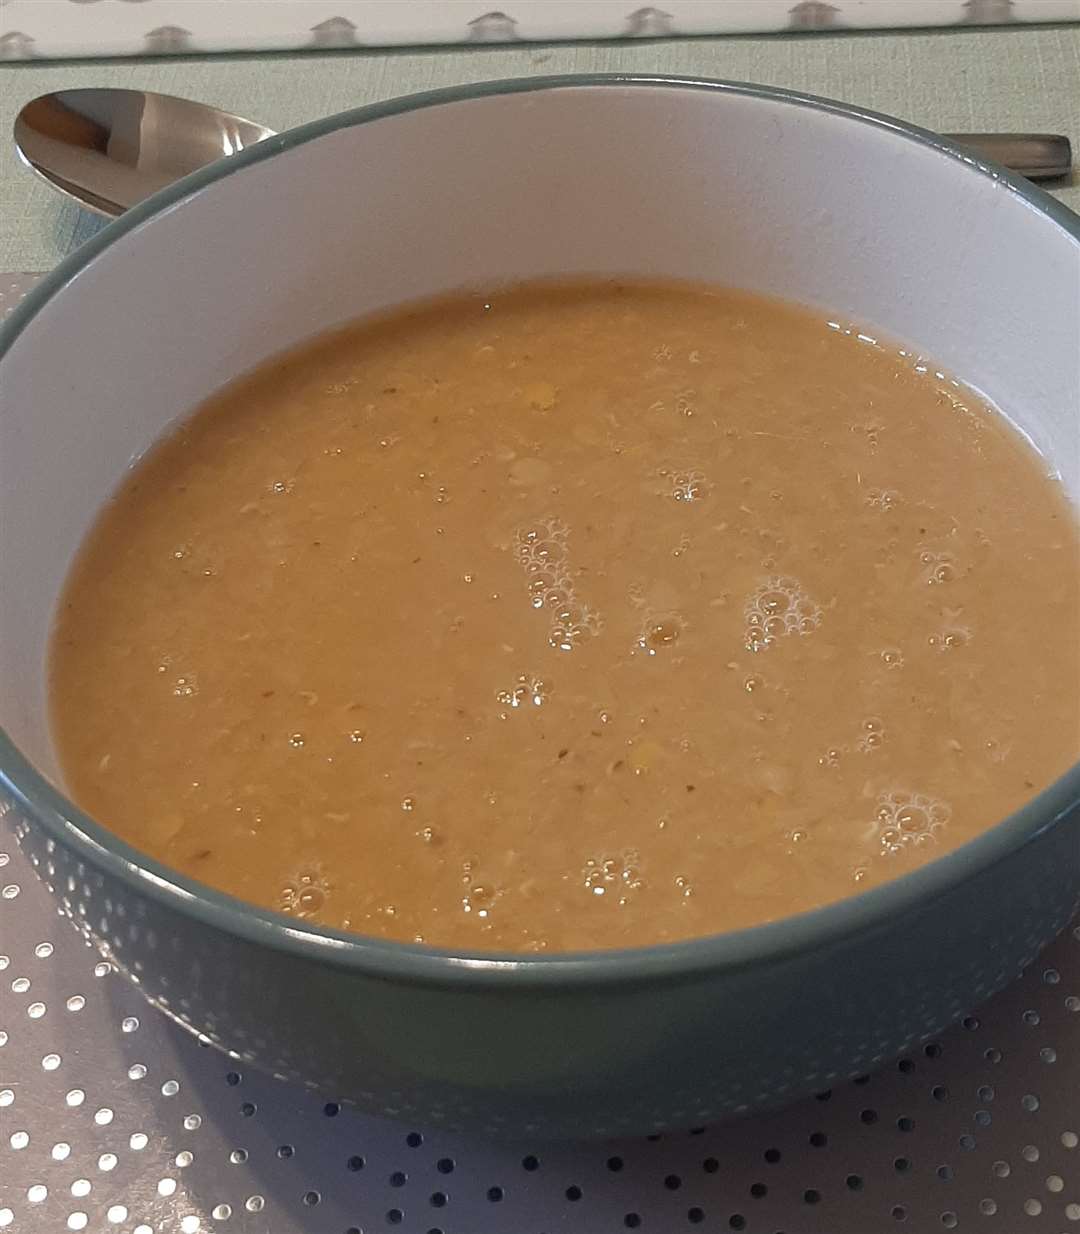 Lentil soup, not the most exciting but it filled me up for the night